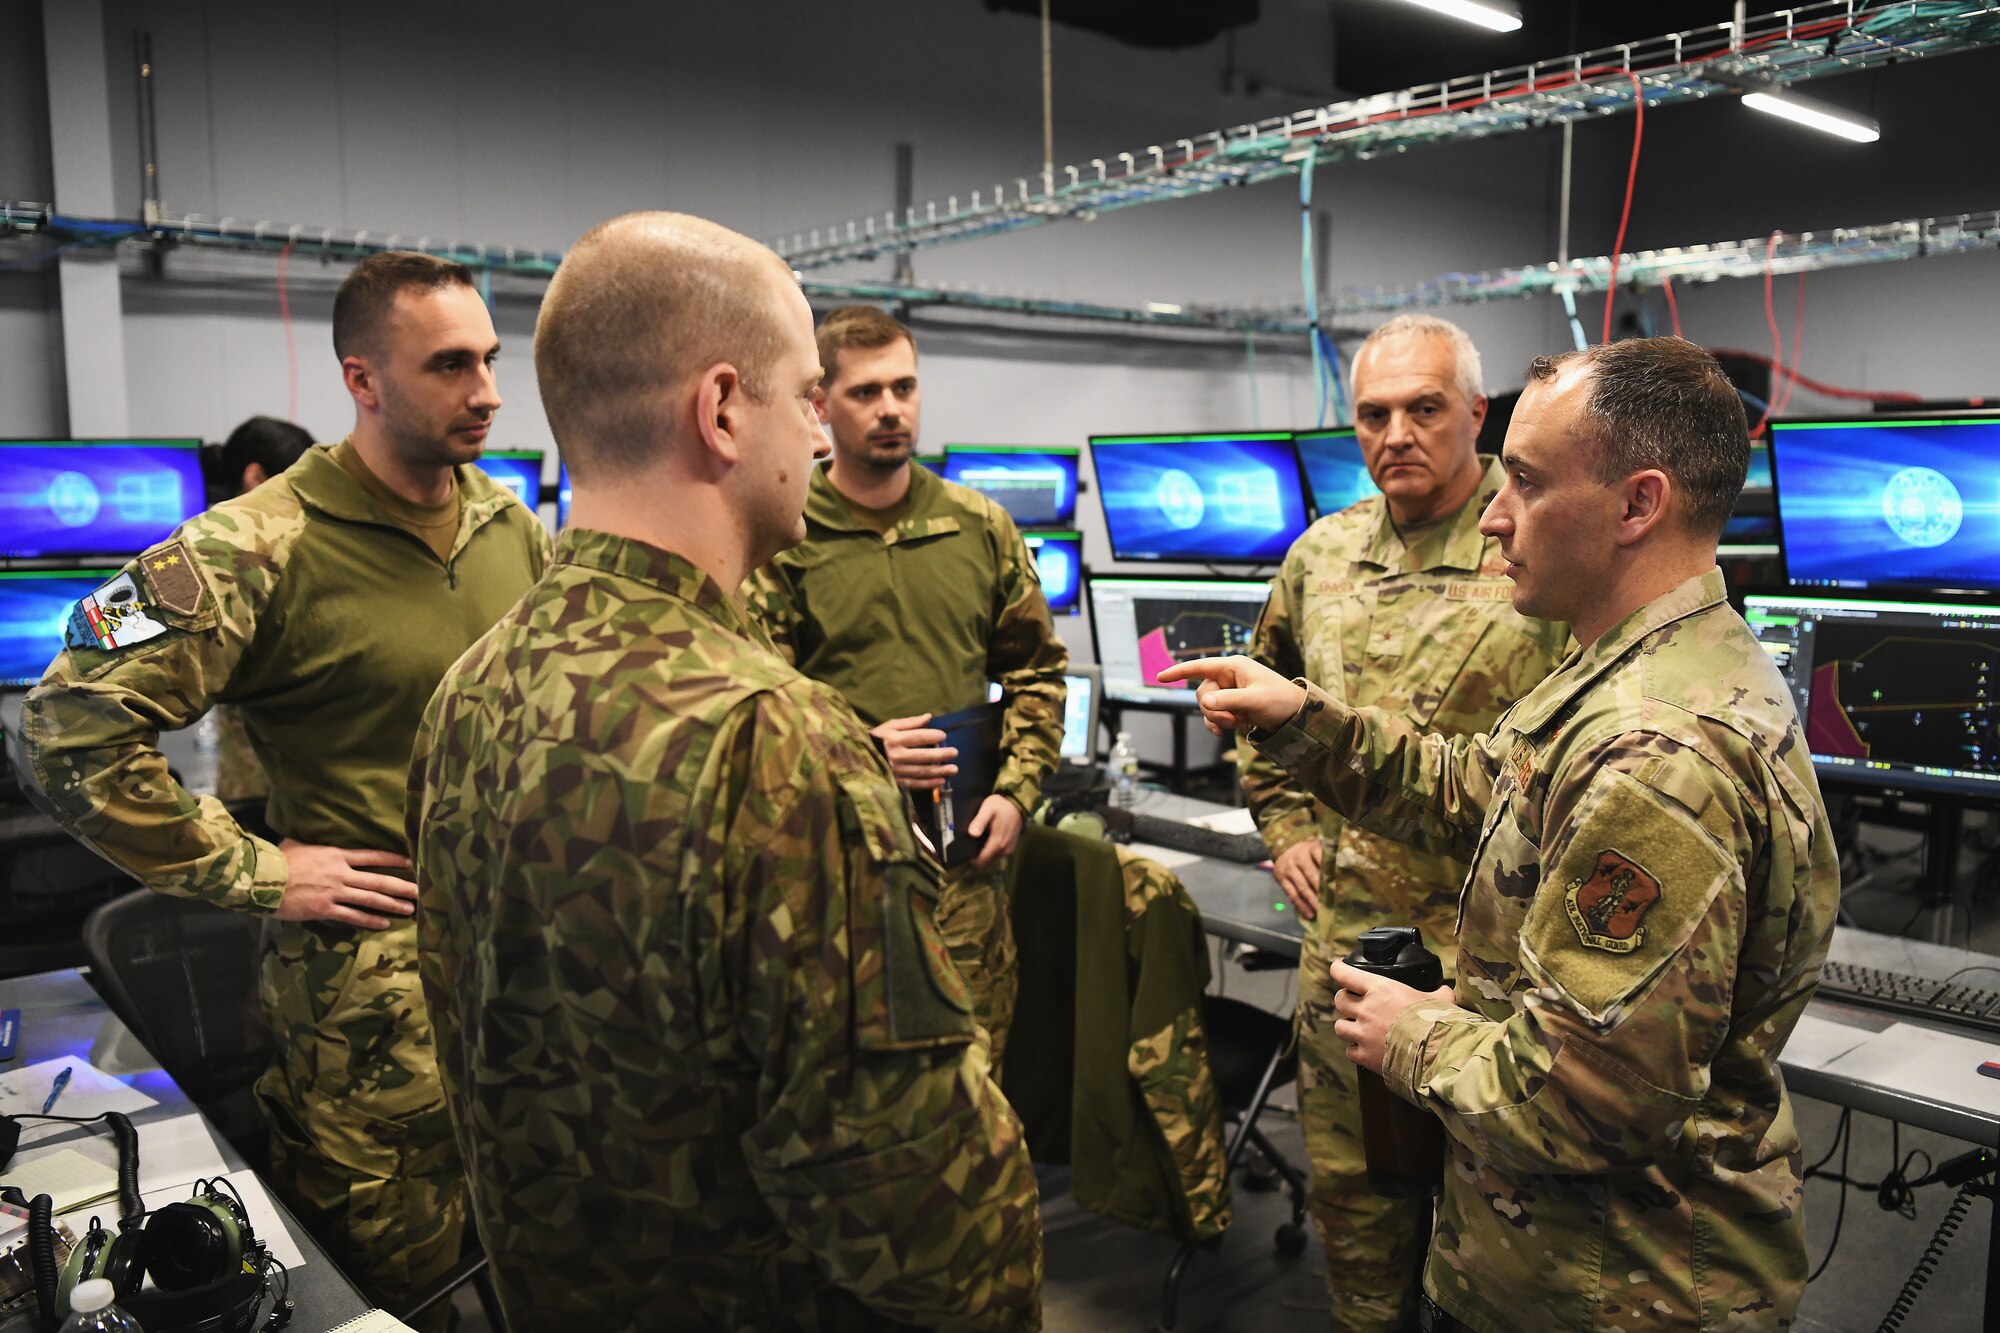 U.S. Air Force Maj. William Rief, senior operations officer assigned to the Ohio National Guard’s 123rd Air Control Squadron reviews lessons with service members from Lithuania, Latvia and Hungary during a joint training exercise April 28, 2023 in Blue Ash, Ohio. The Air Force is the global partner of preference for airpower and will be integrated with its allies and partners in future fights. (U.S. Air National Guard photo by Shane Hughes)